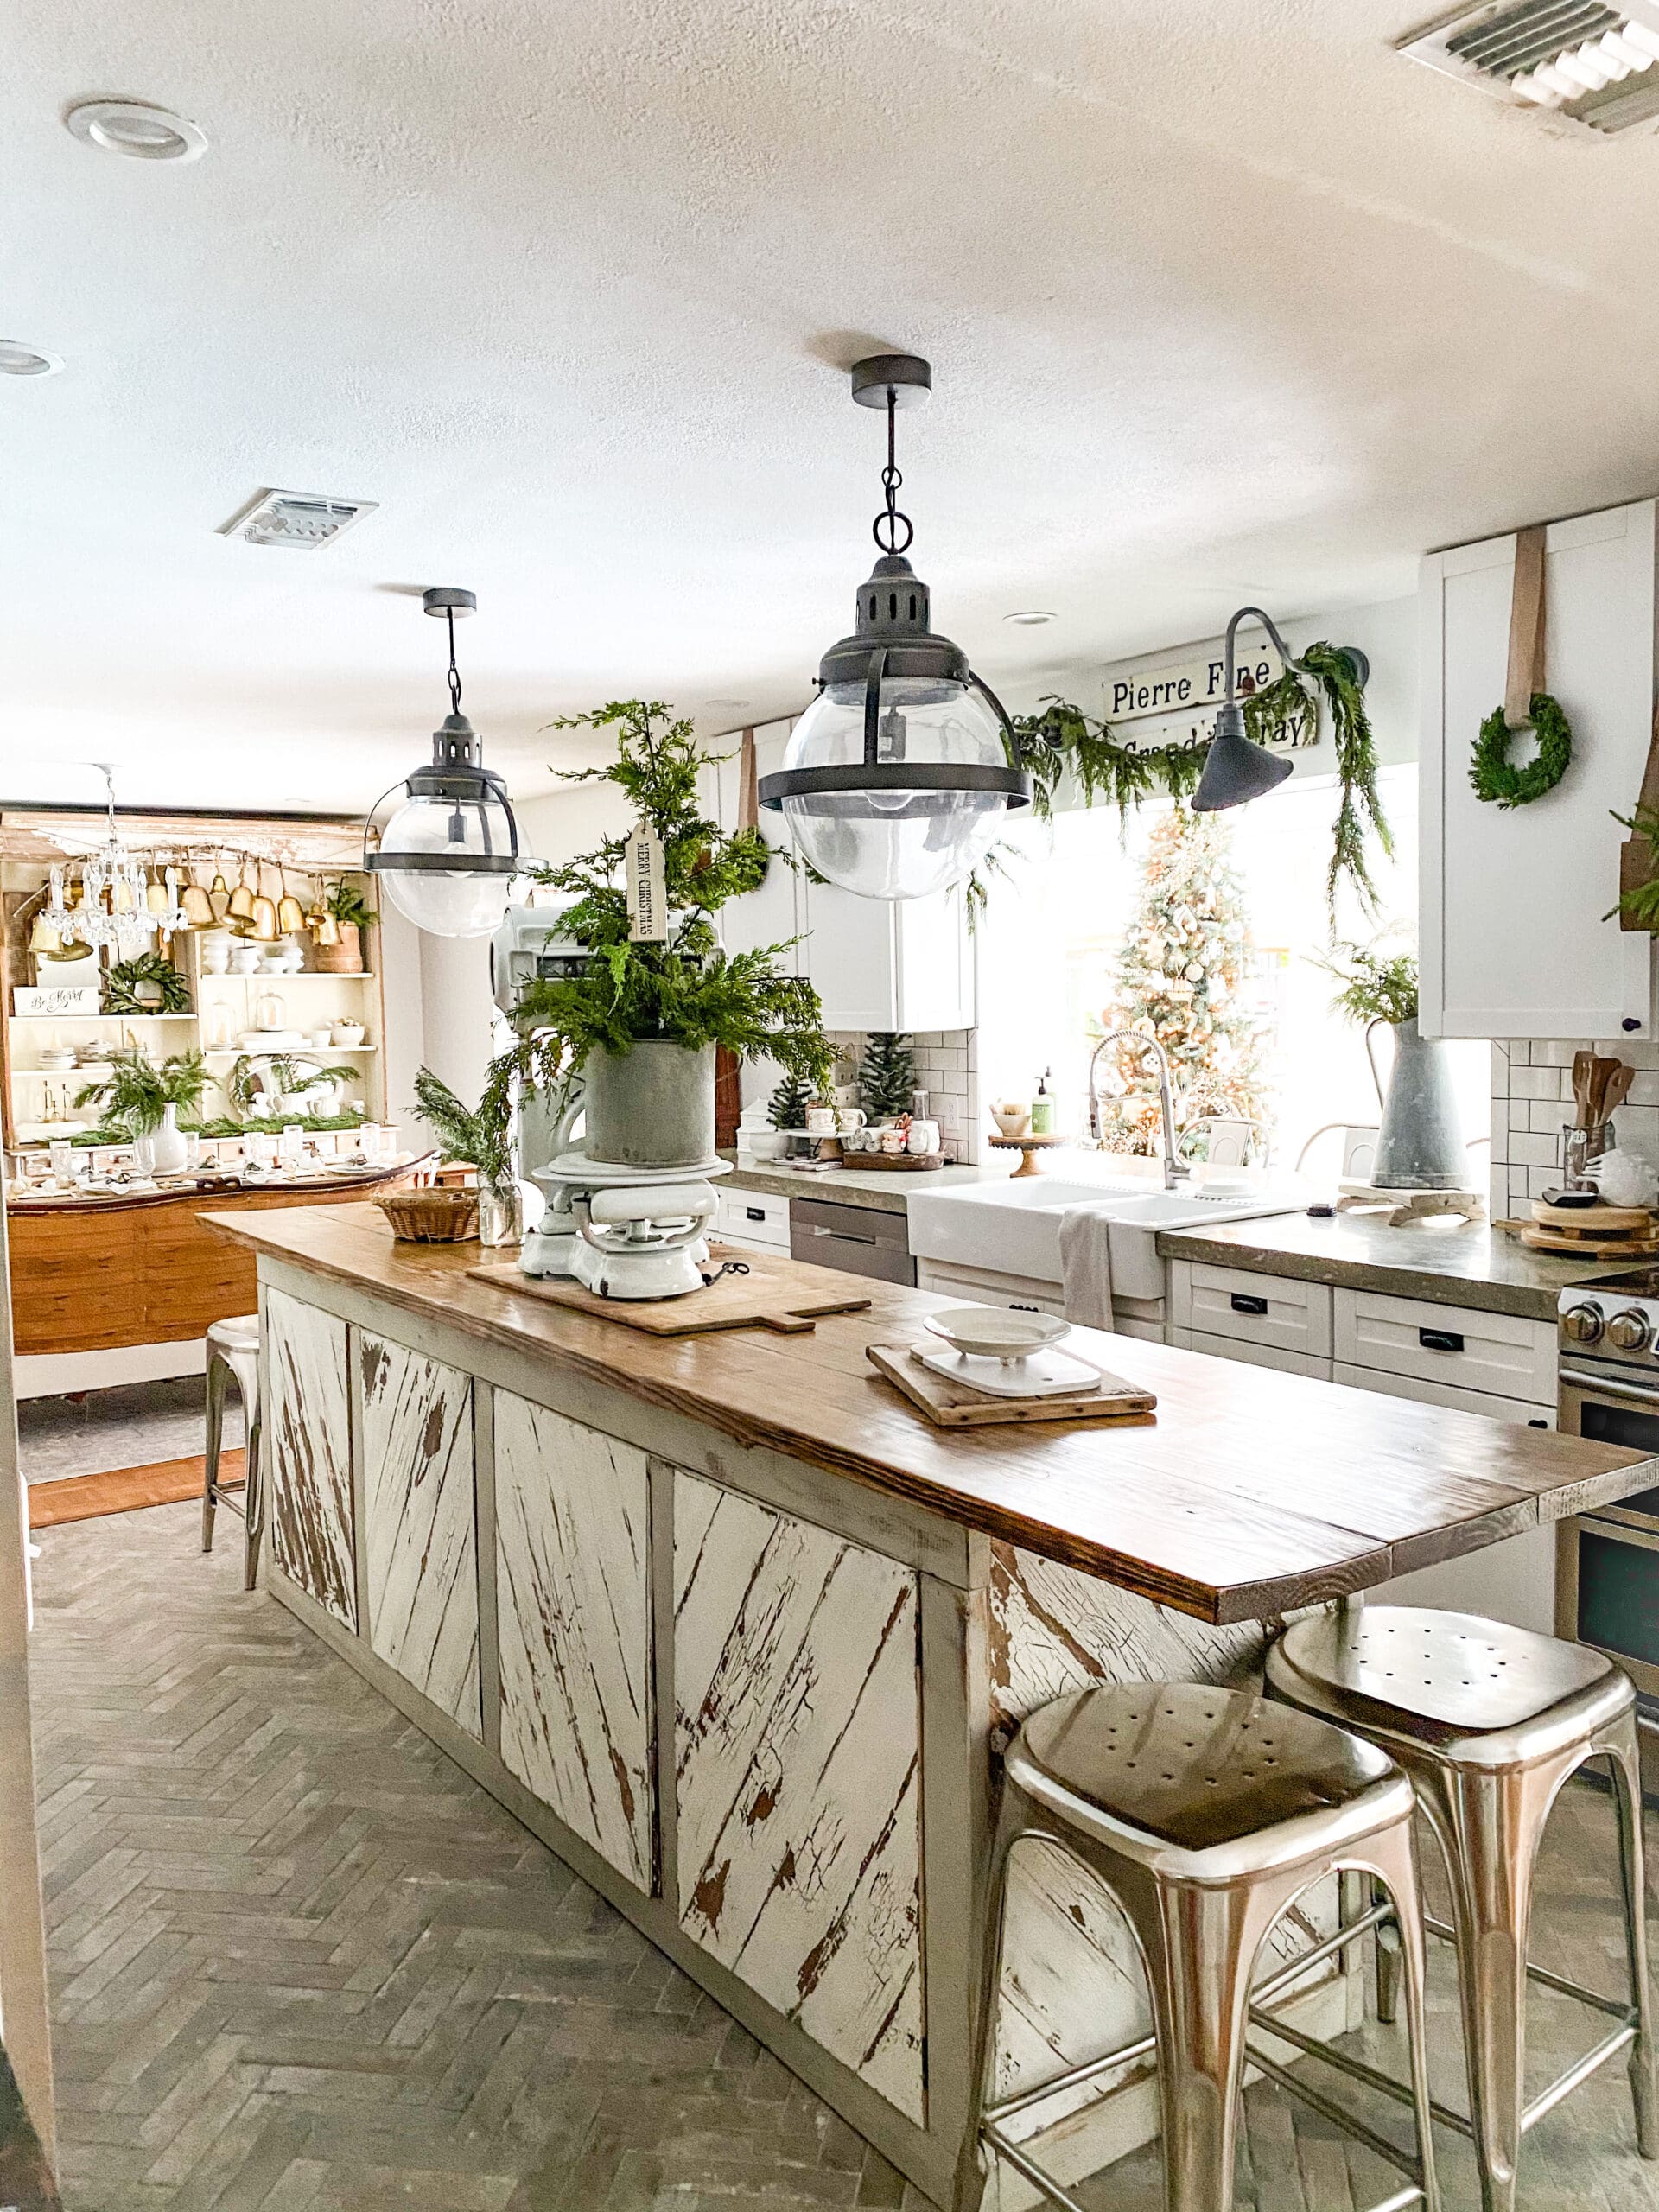 kitchen island styled with a vintage white scale with a small tree and garland strung between cabinets